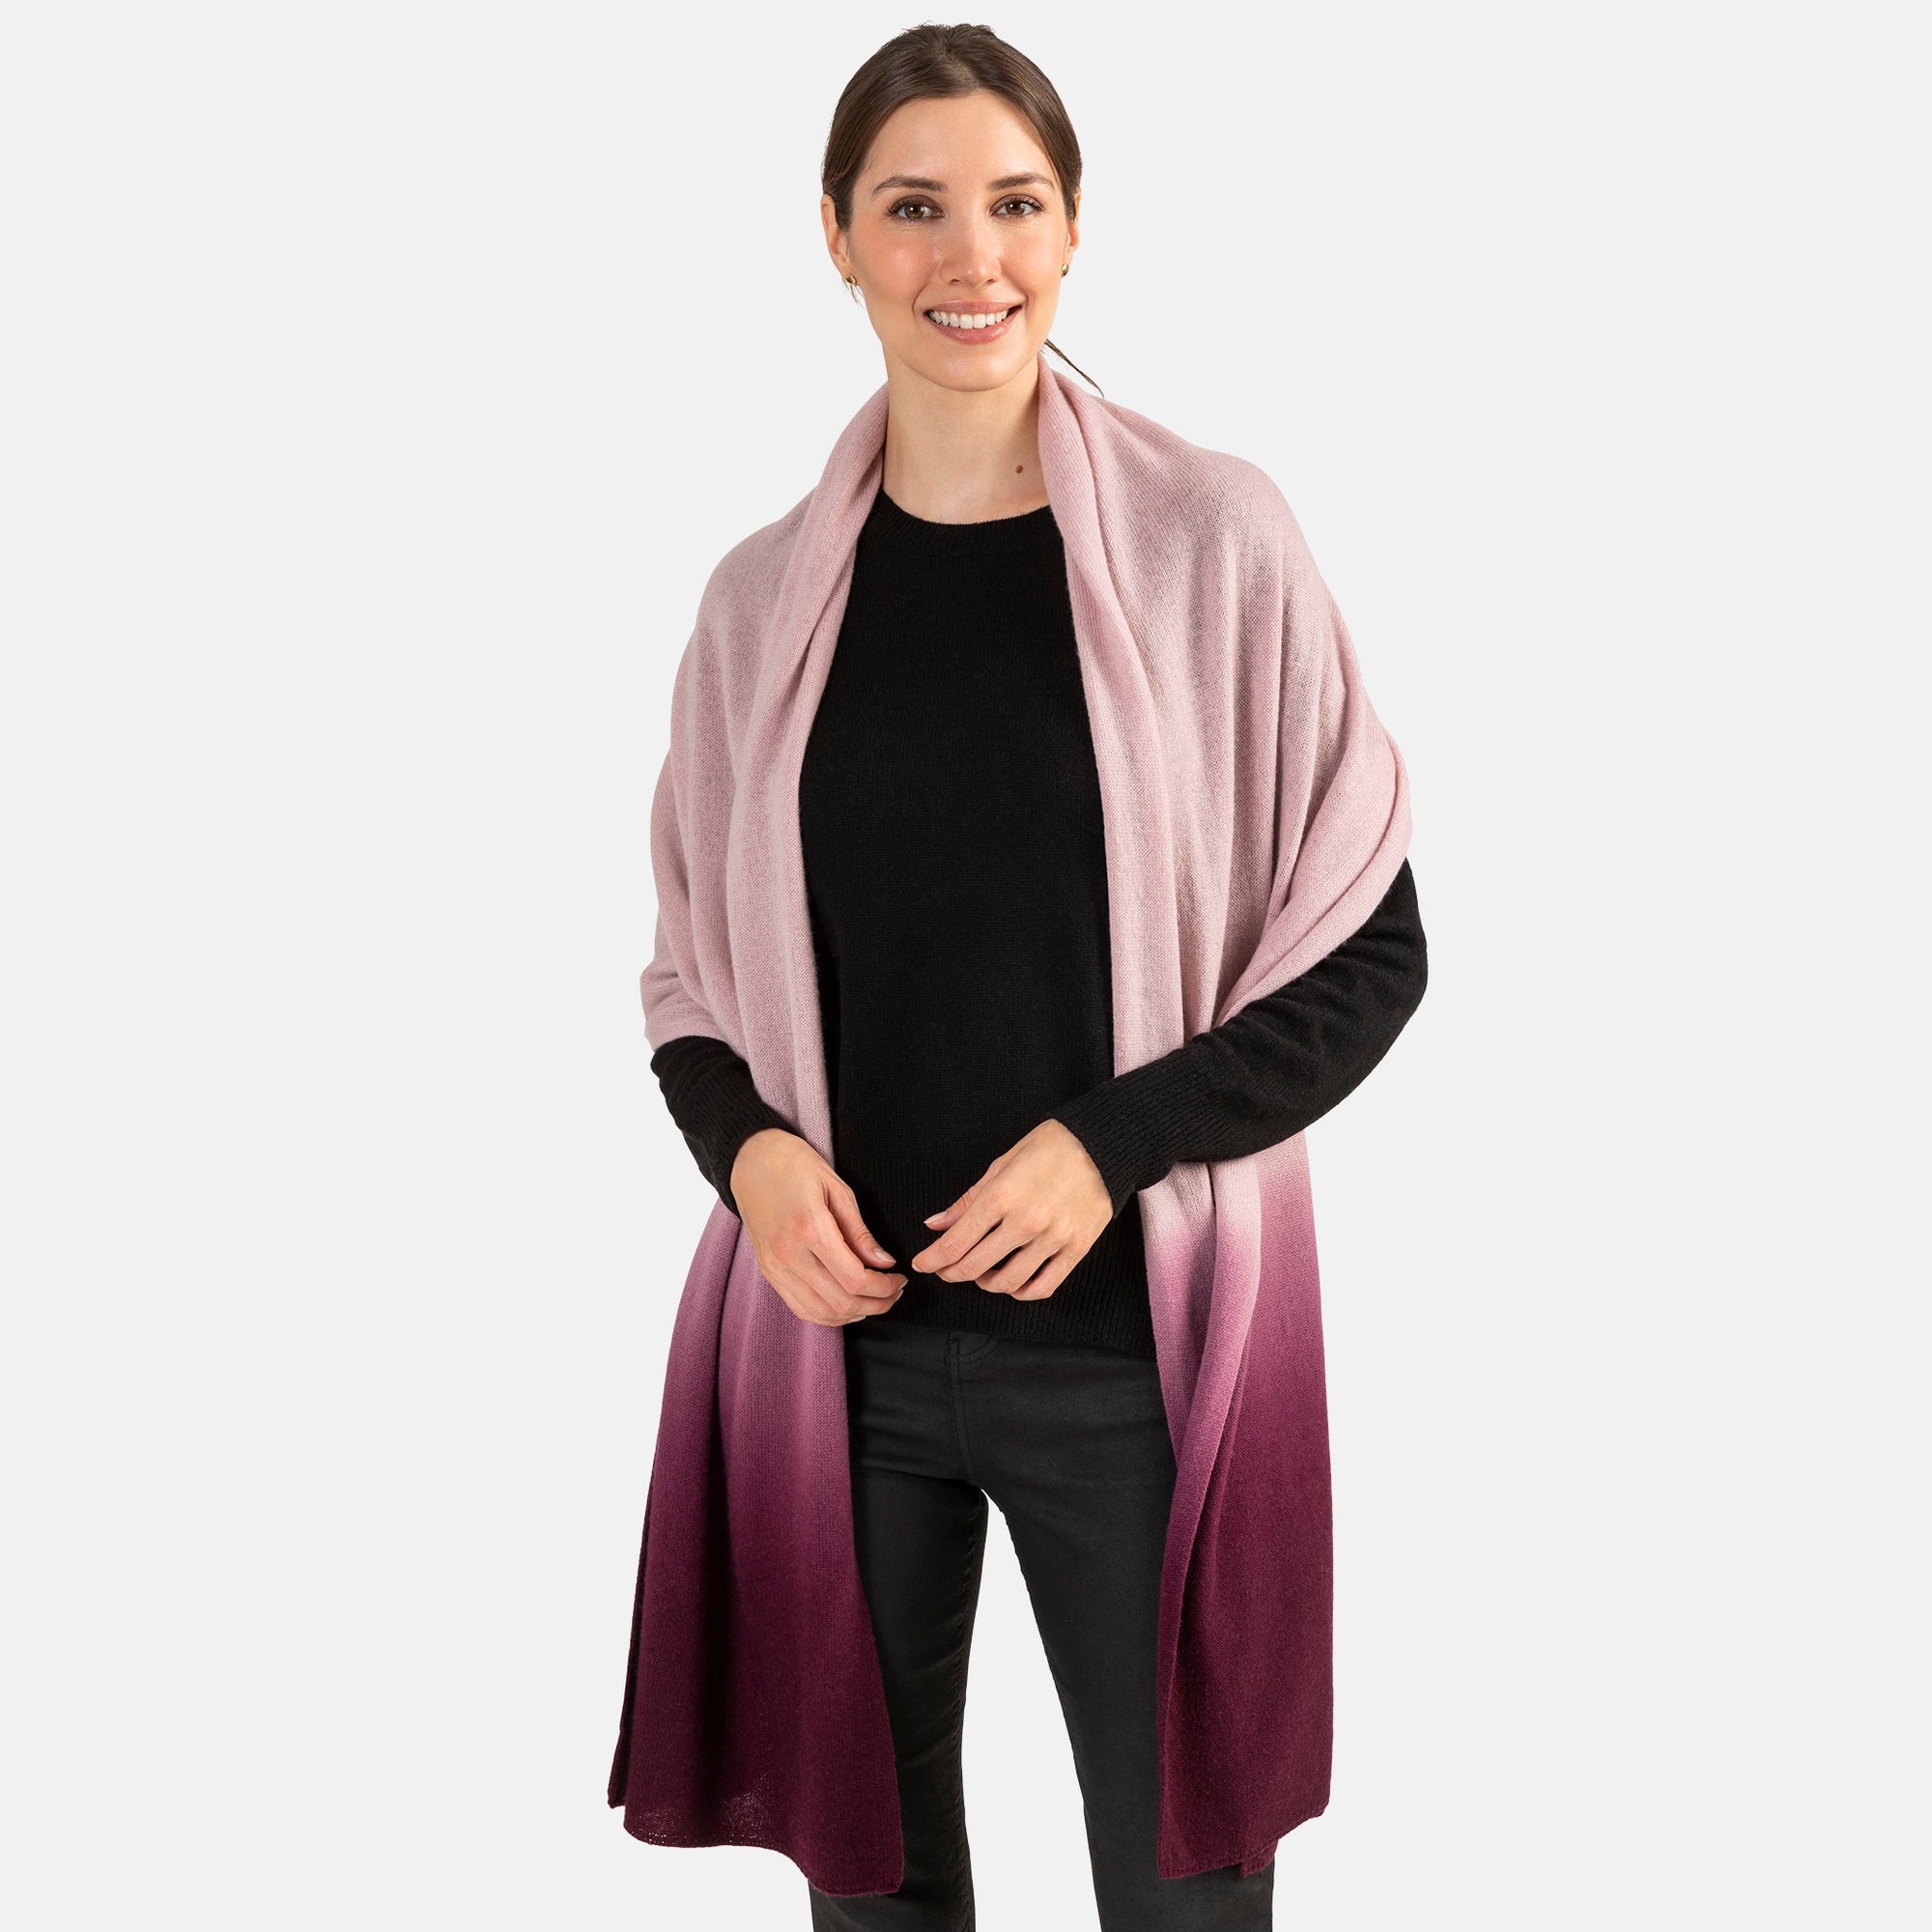 Picture of a woman wearing an oversized knitted cashmere travel wrap or scarf with an ombre pattern in pink and burgundy.  [Dusty Rose/Bordeaux]